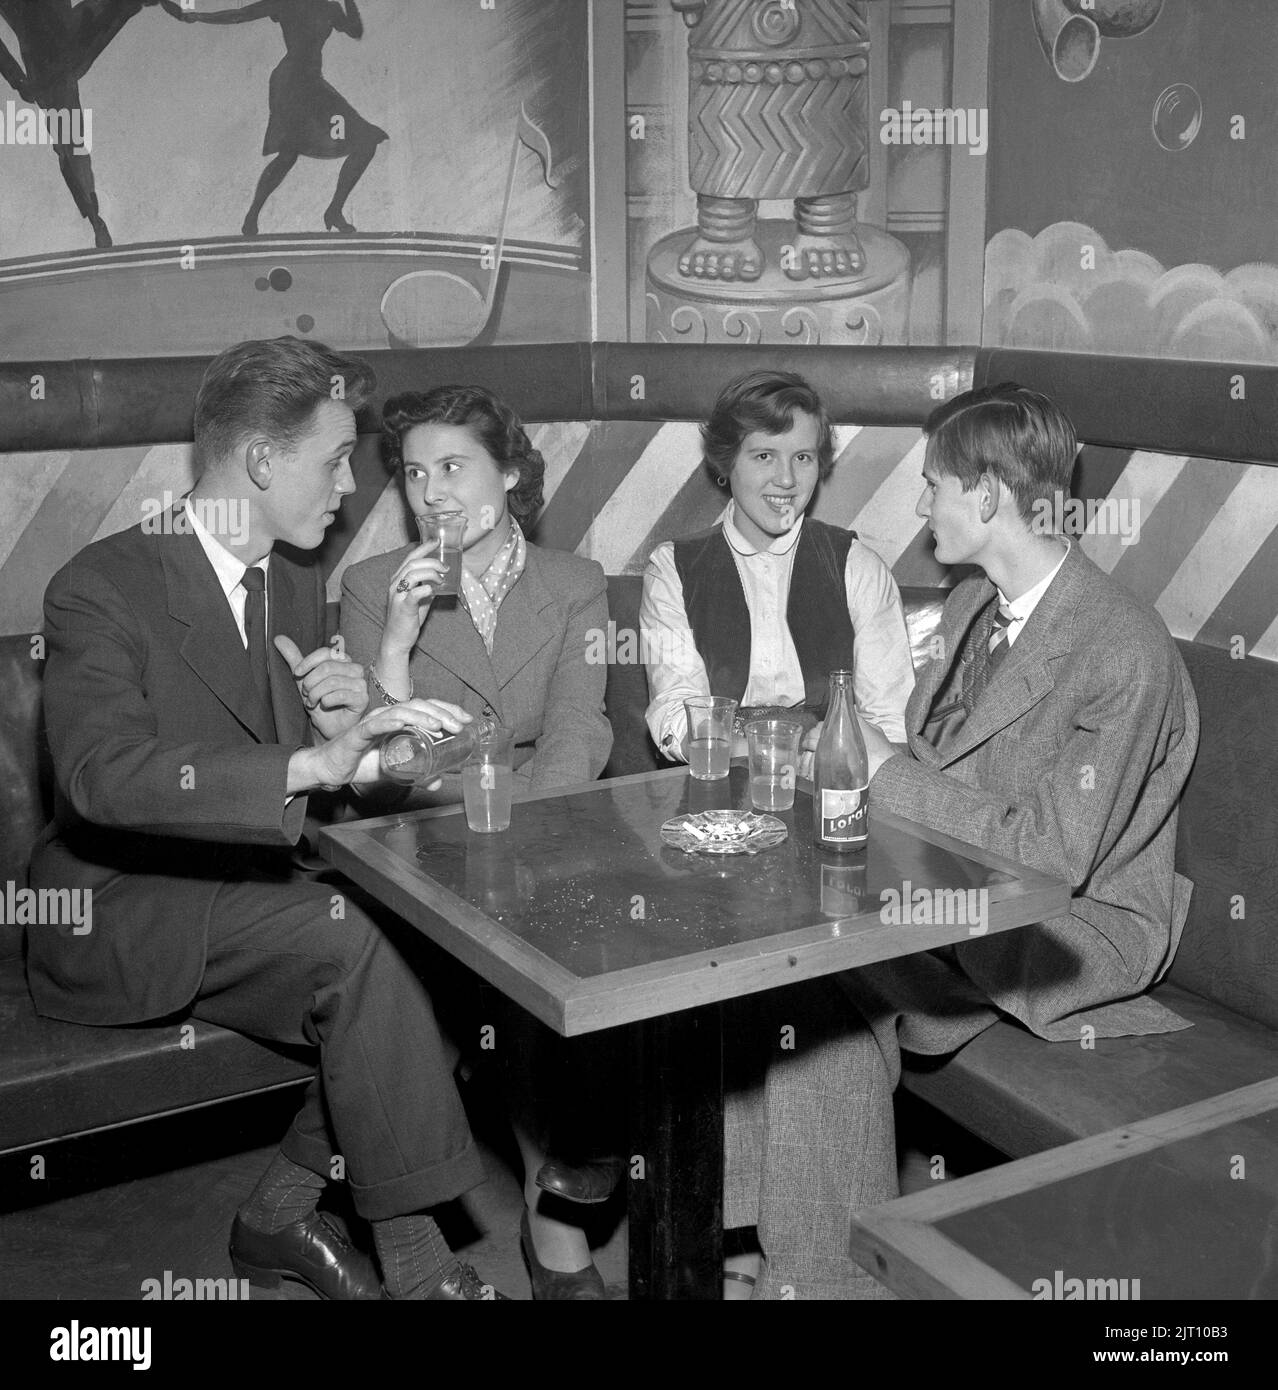 In the 1950s. Two young couples in the bar at Nalen dance establishment in Stockholm that at the time did not allow alcoholic beverages. Smoking however is ok. Sweden 1951 Conard ref 1871 Stock Photo